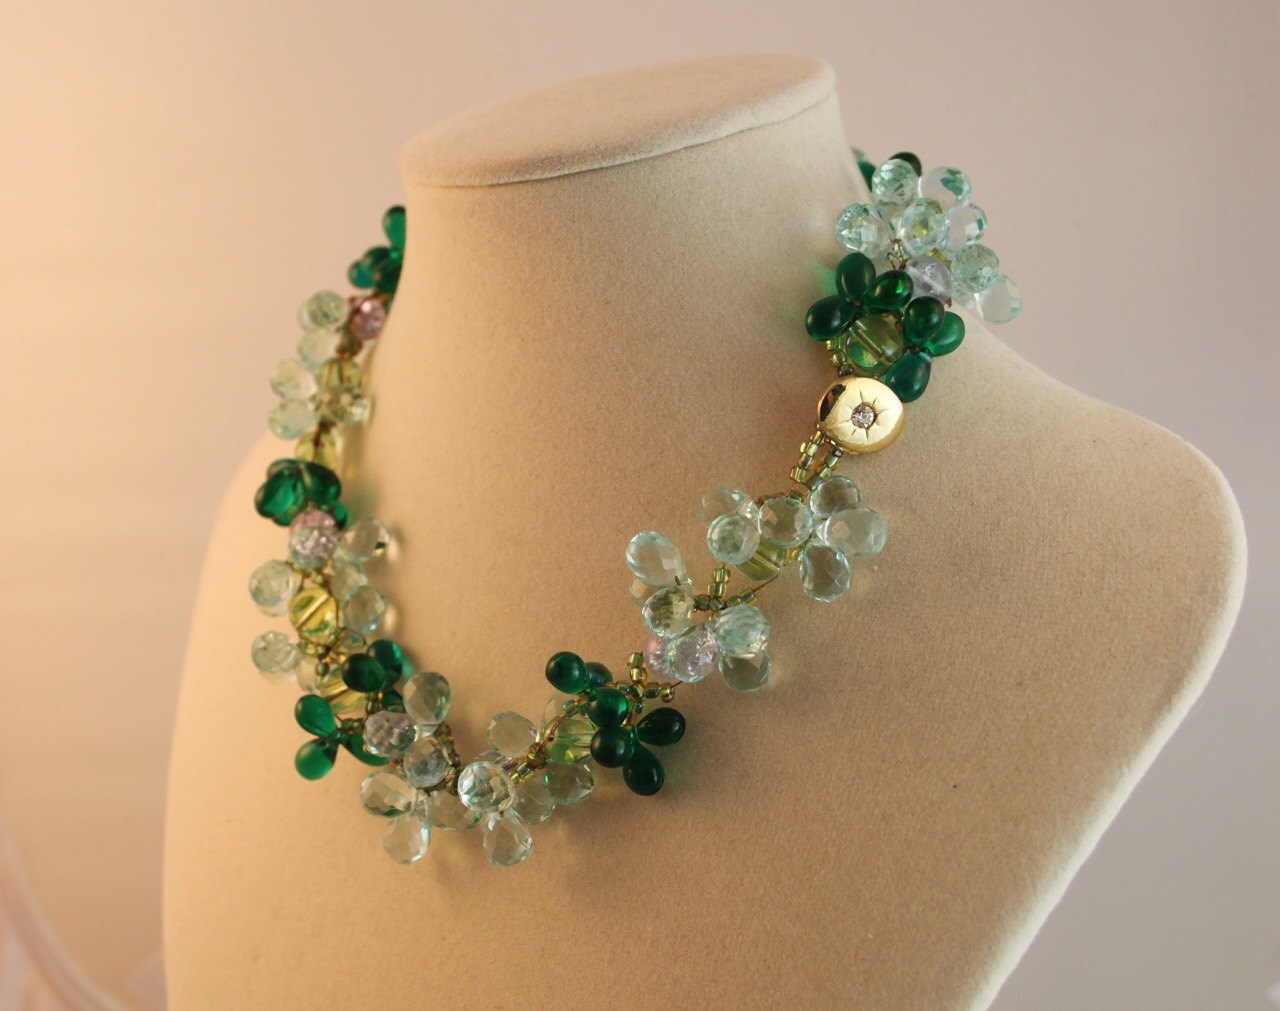 Exceptionally beautiful green and blue glass bead woven necklace. Worn as a piece of art on your neck.